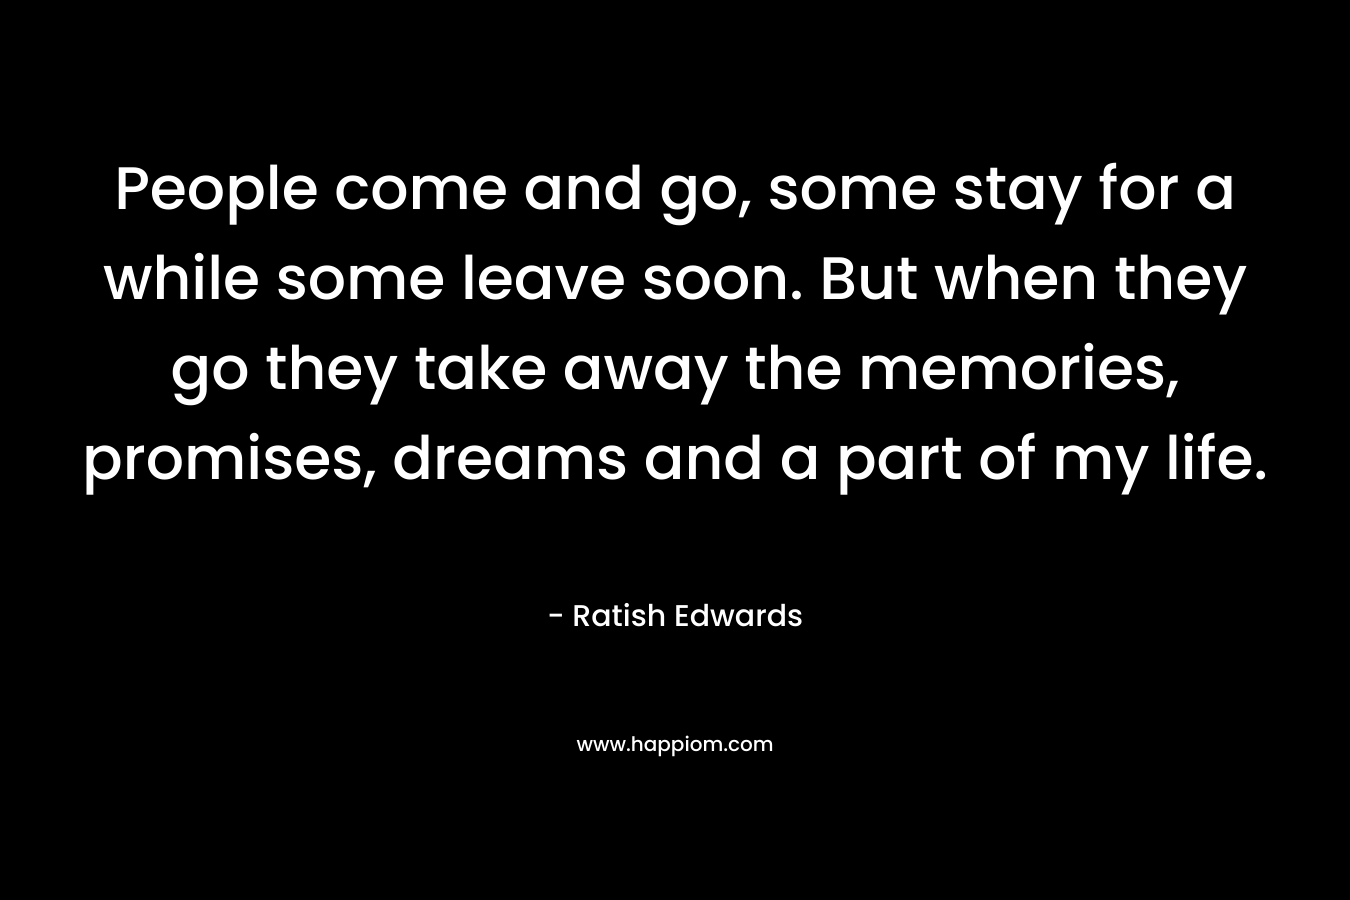 People come and go, some stay for a while some leave soon. But when they go they take away the memories, promises, dreams and a part of my life. – Ratish Edwards